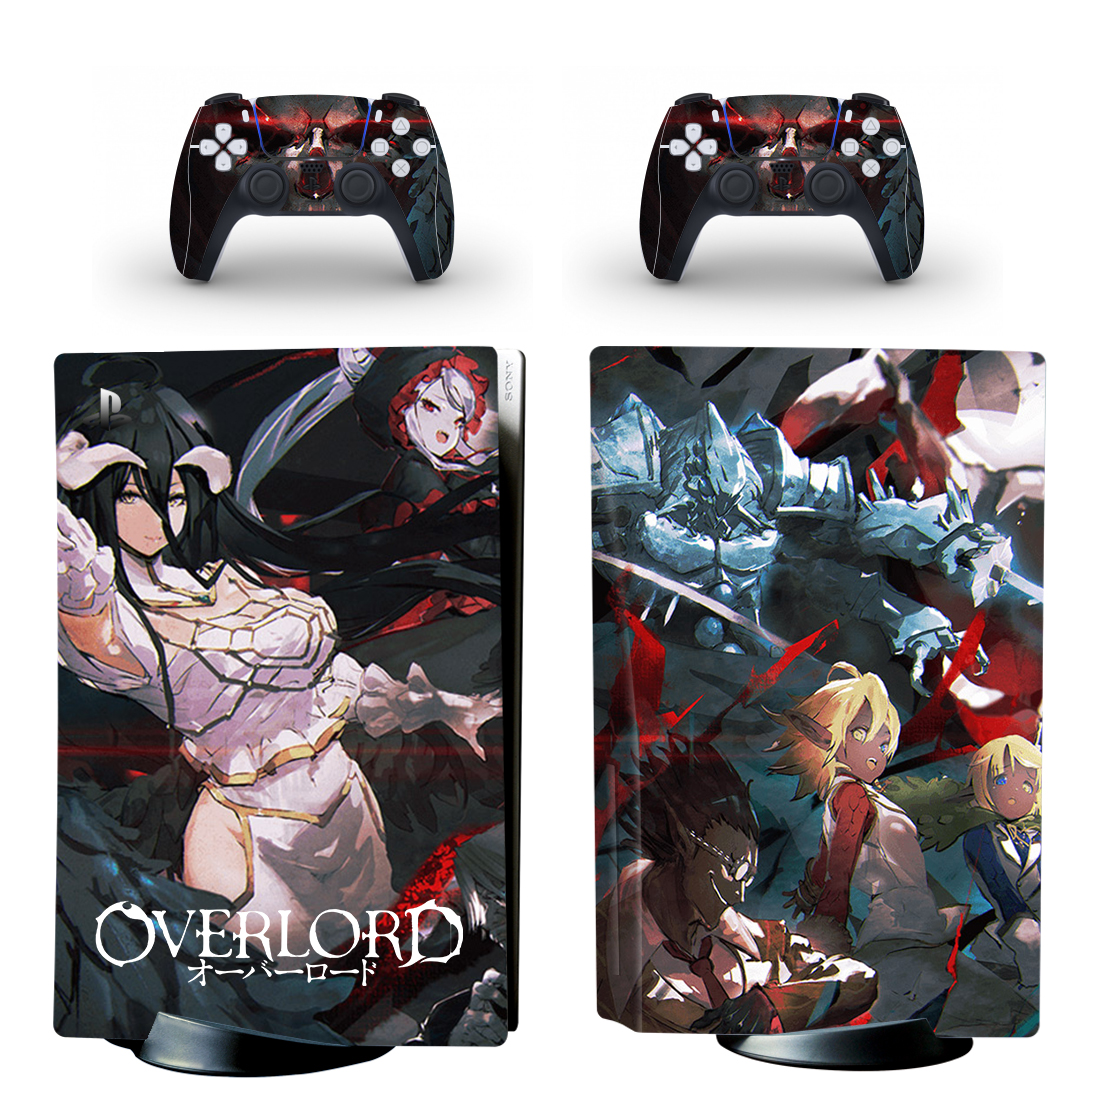 Overlord Console Skin Sticker And Controllers